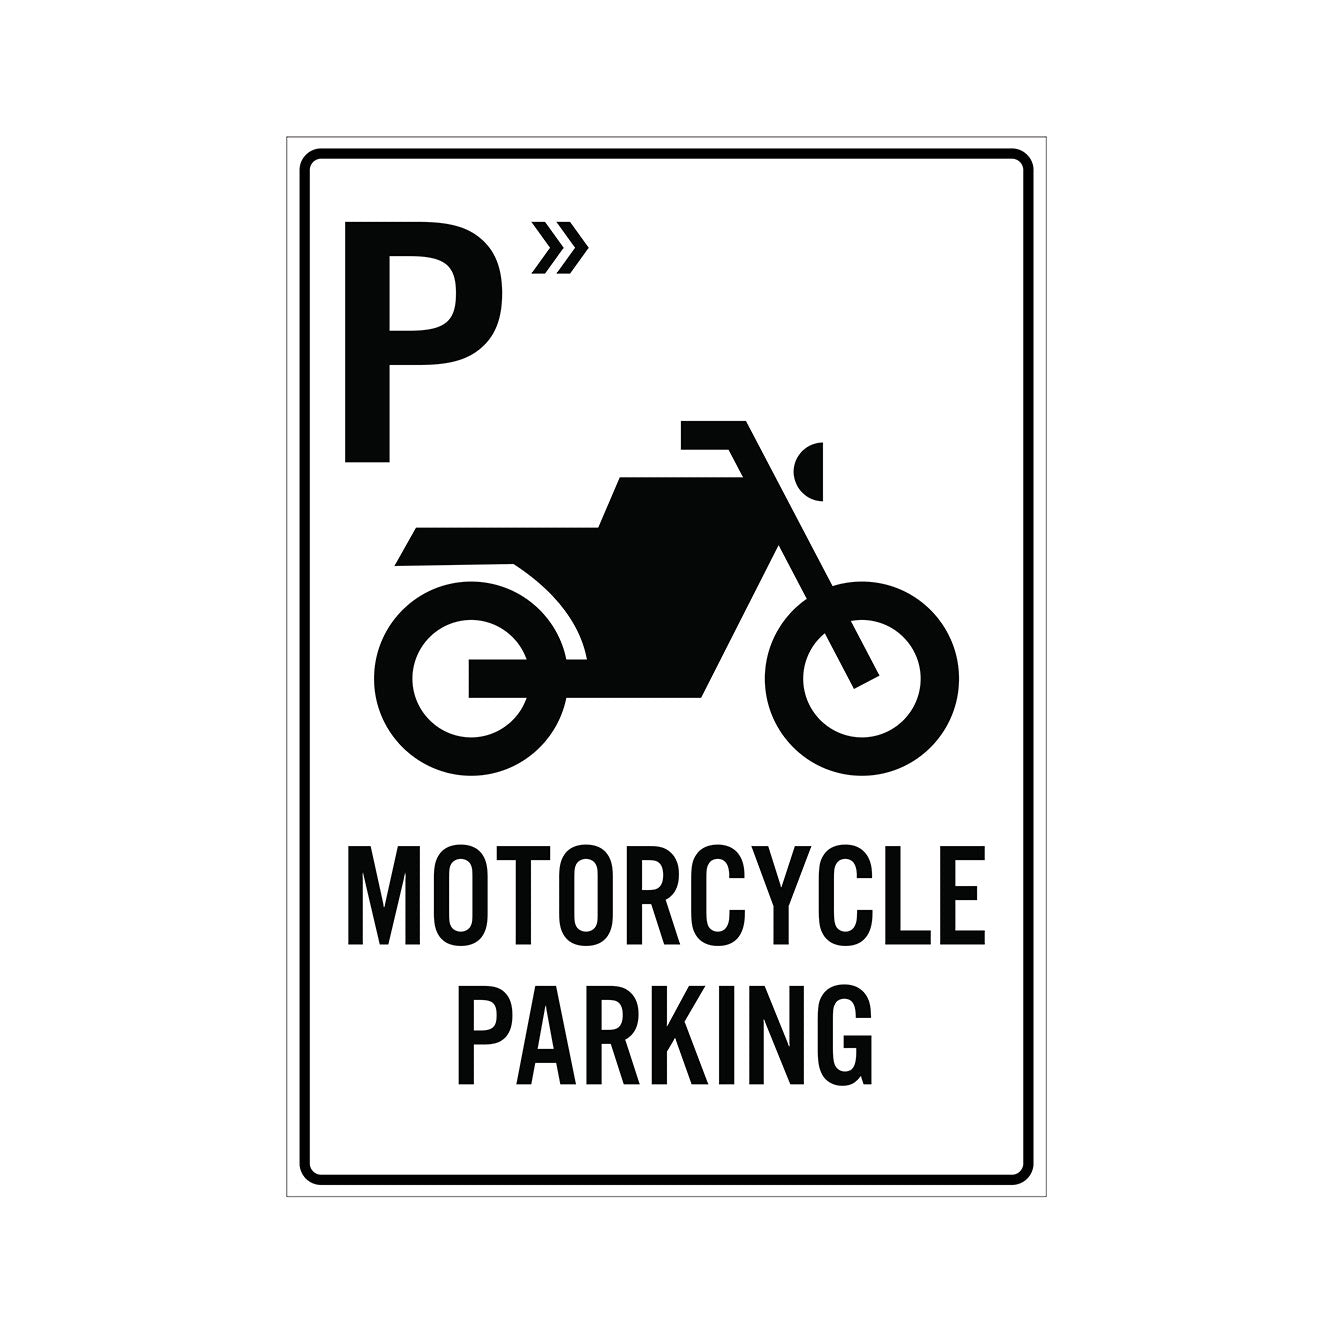 MOTORCYCLE PARKING SIGN – Get signs